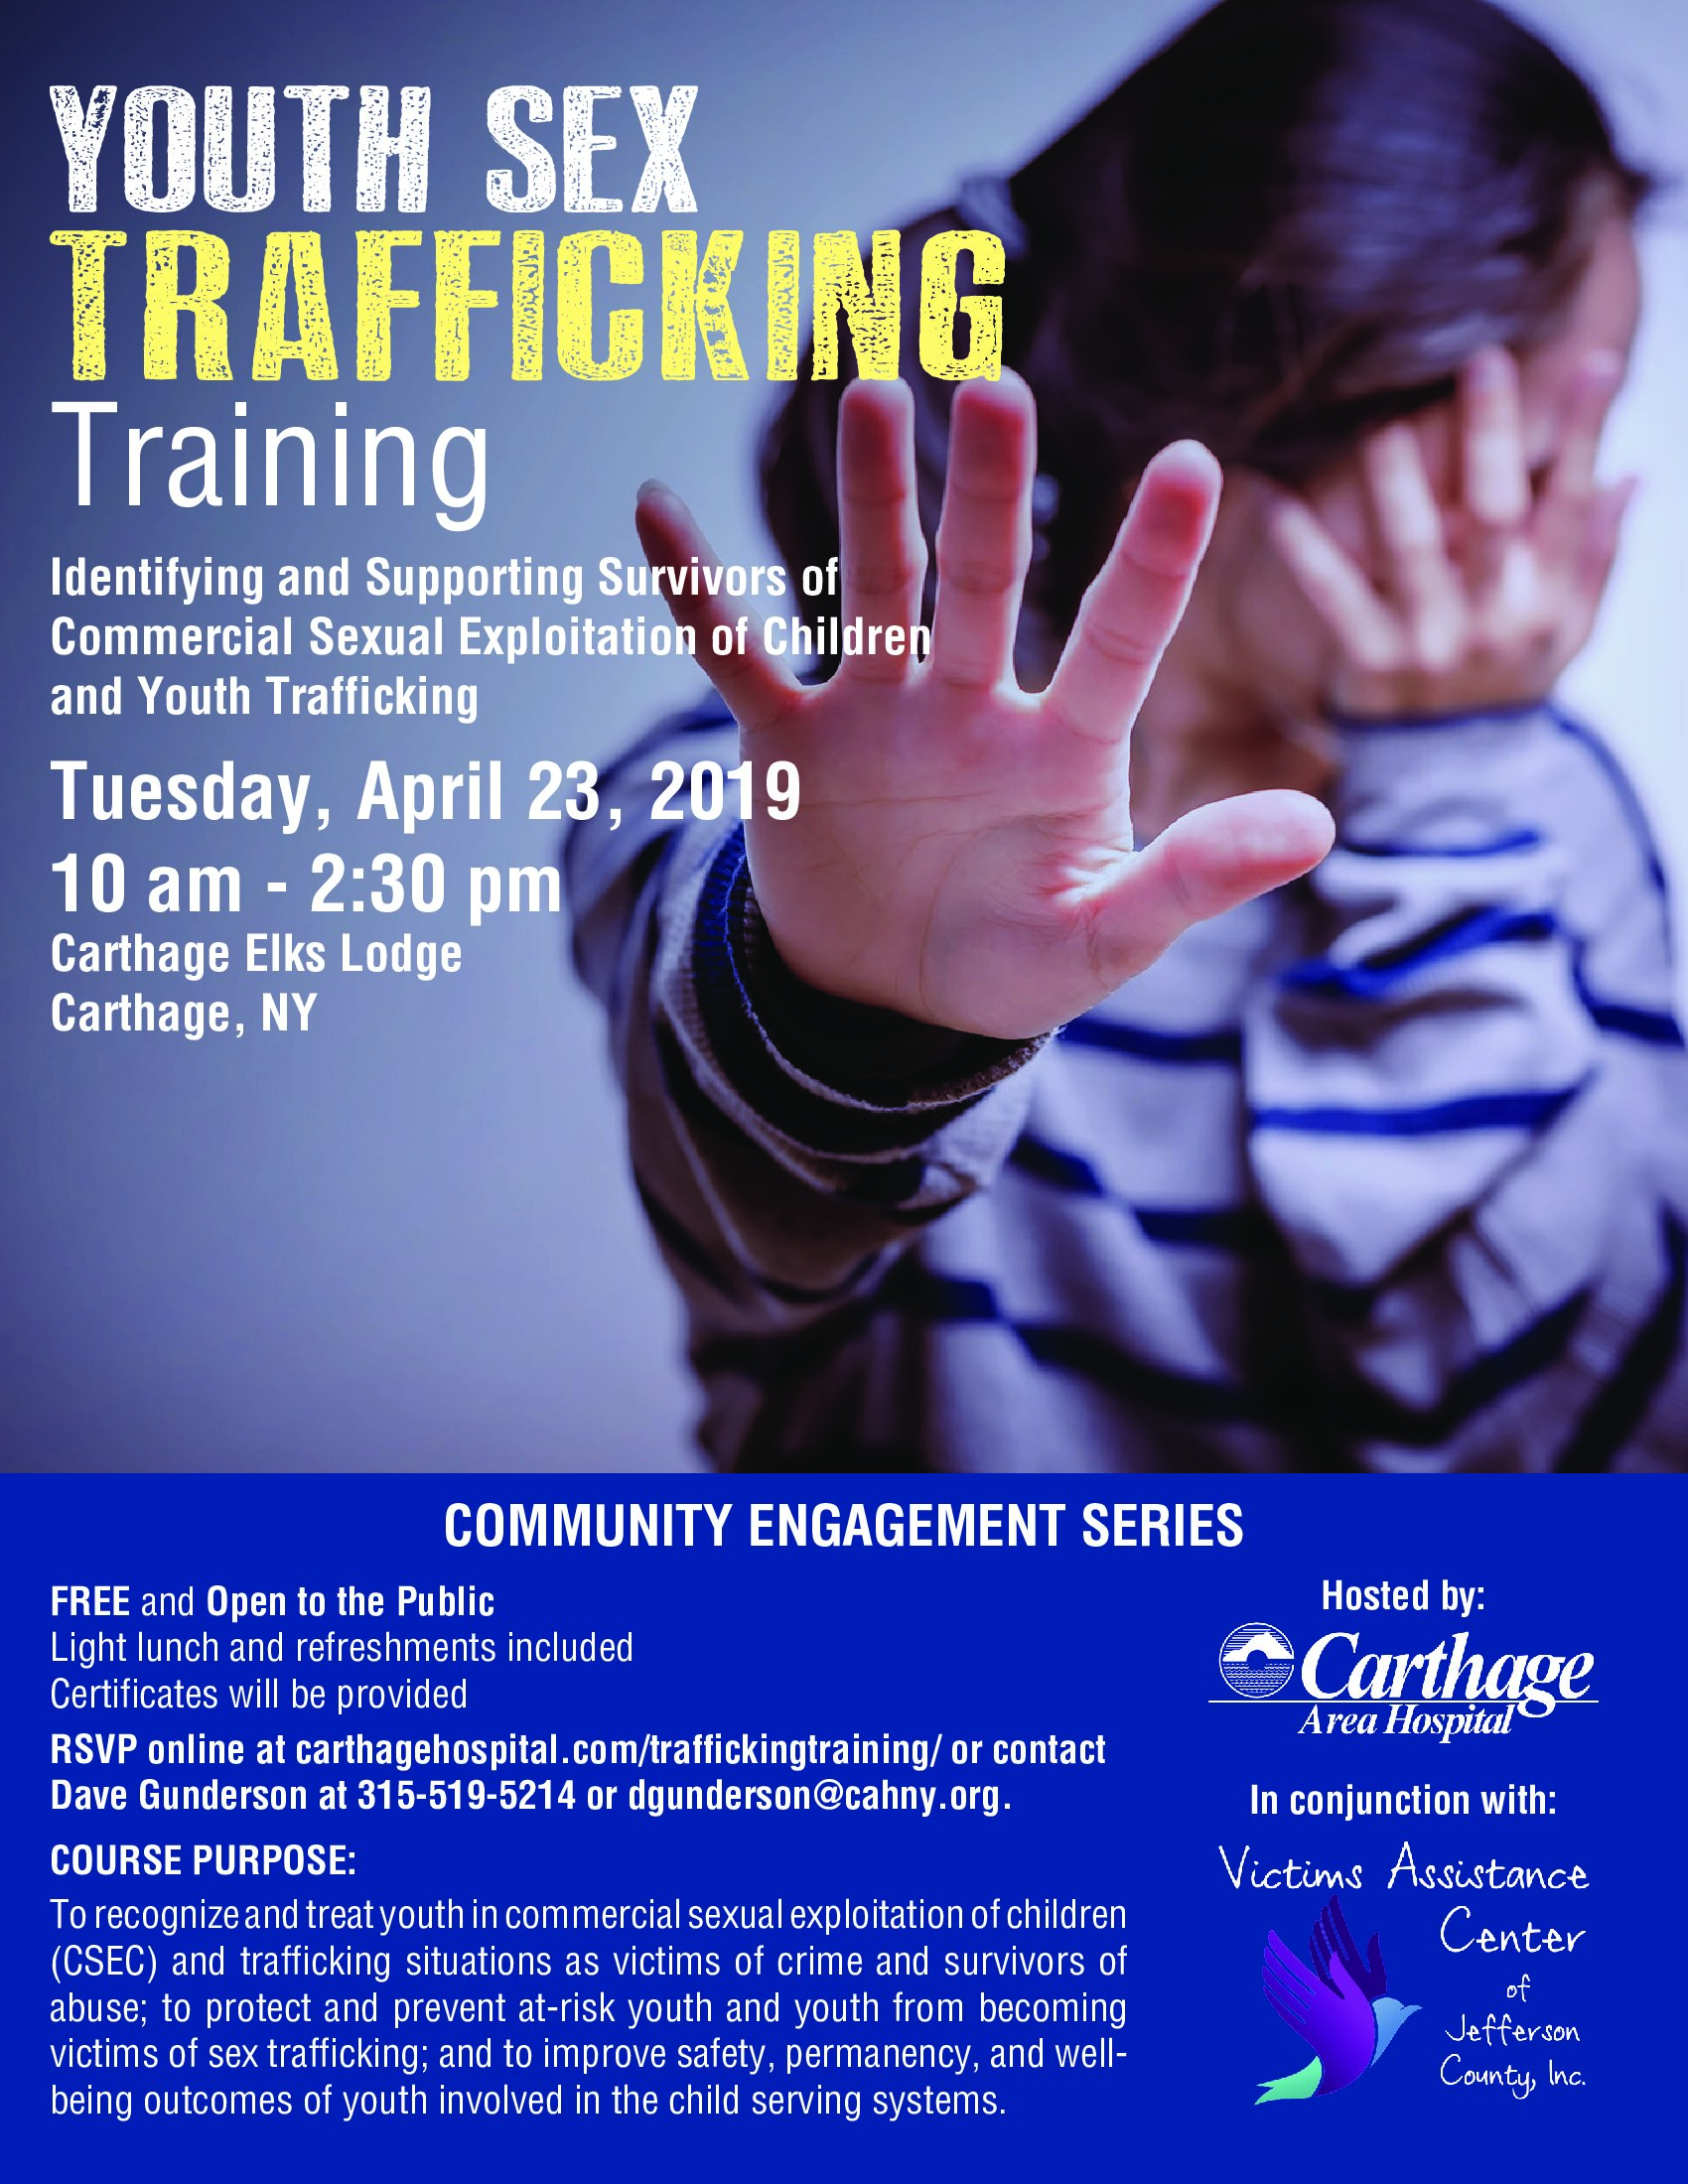 Youth Sex Trafficking Awareness Training Scheduled For April 23rd